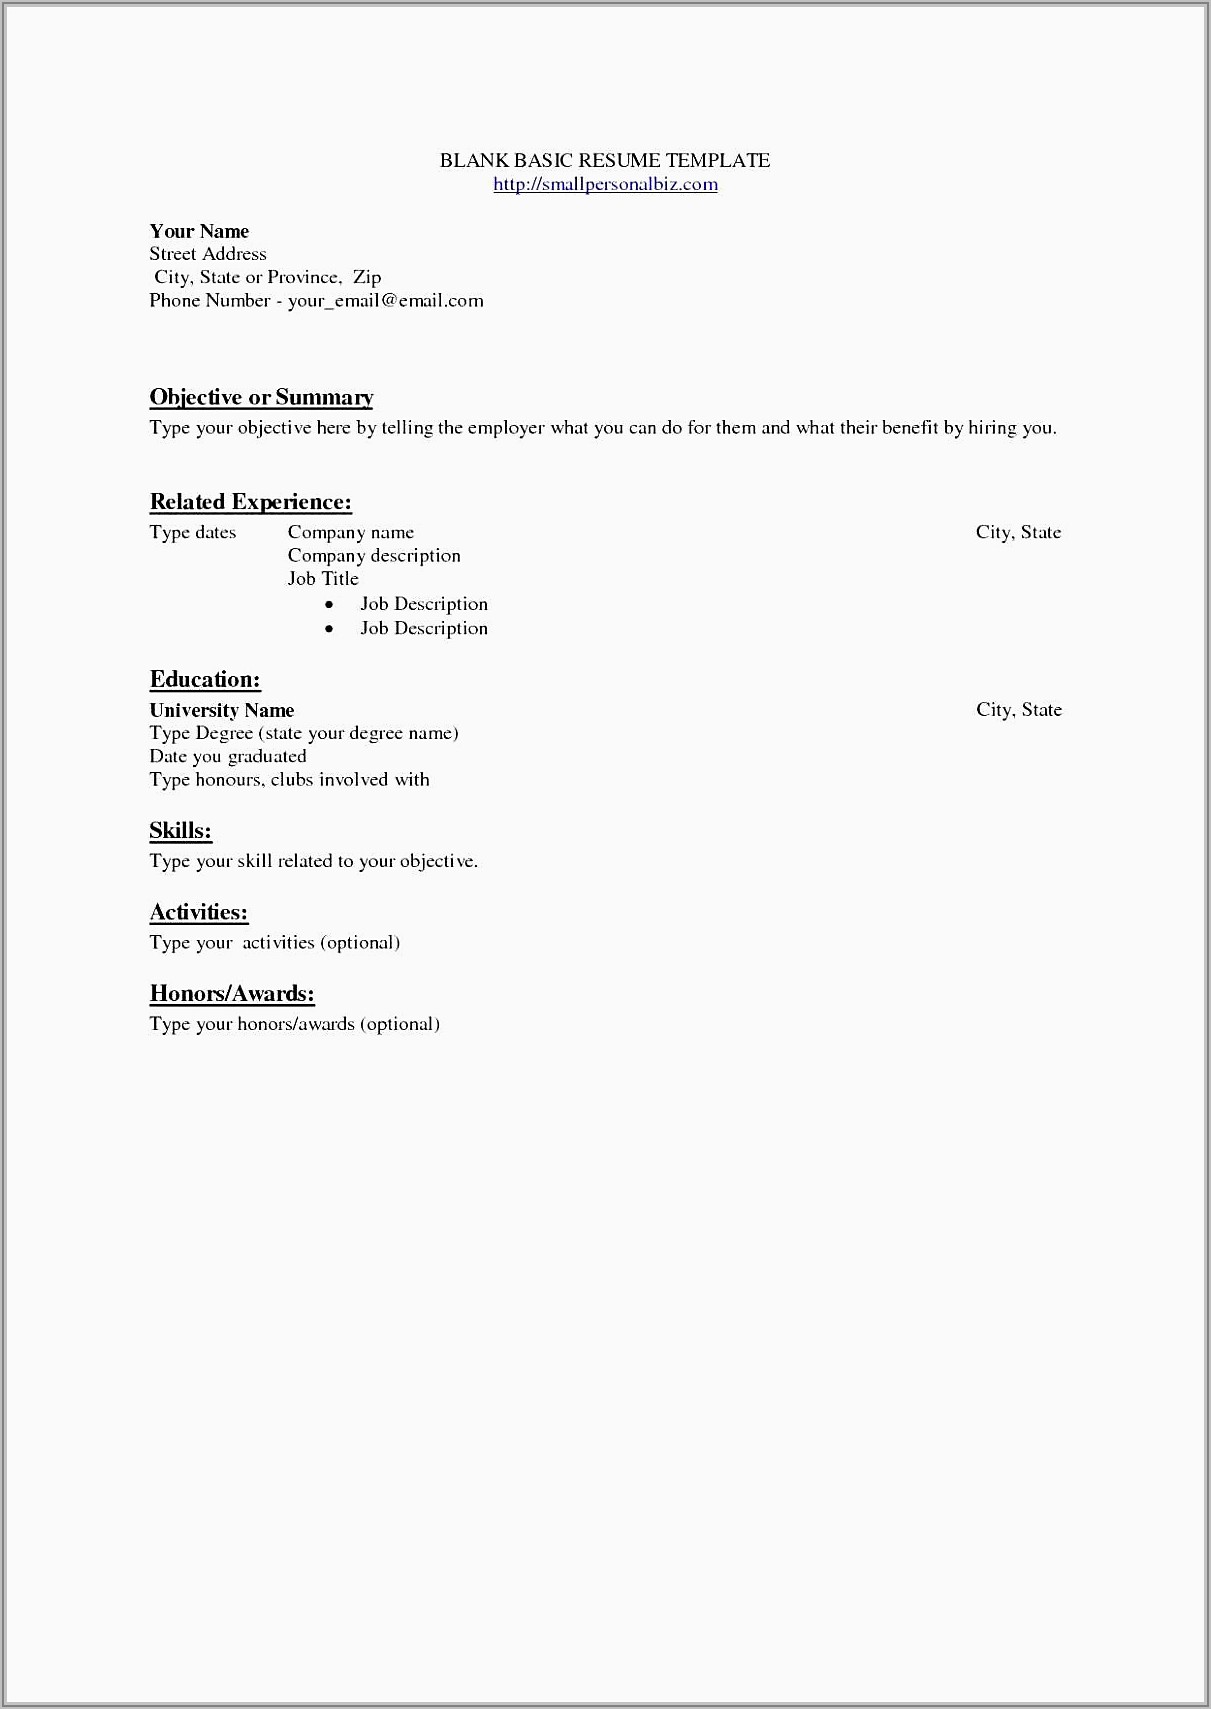 Sample Resume For Freshers Ece Engineers